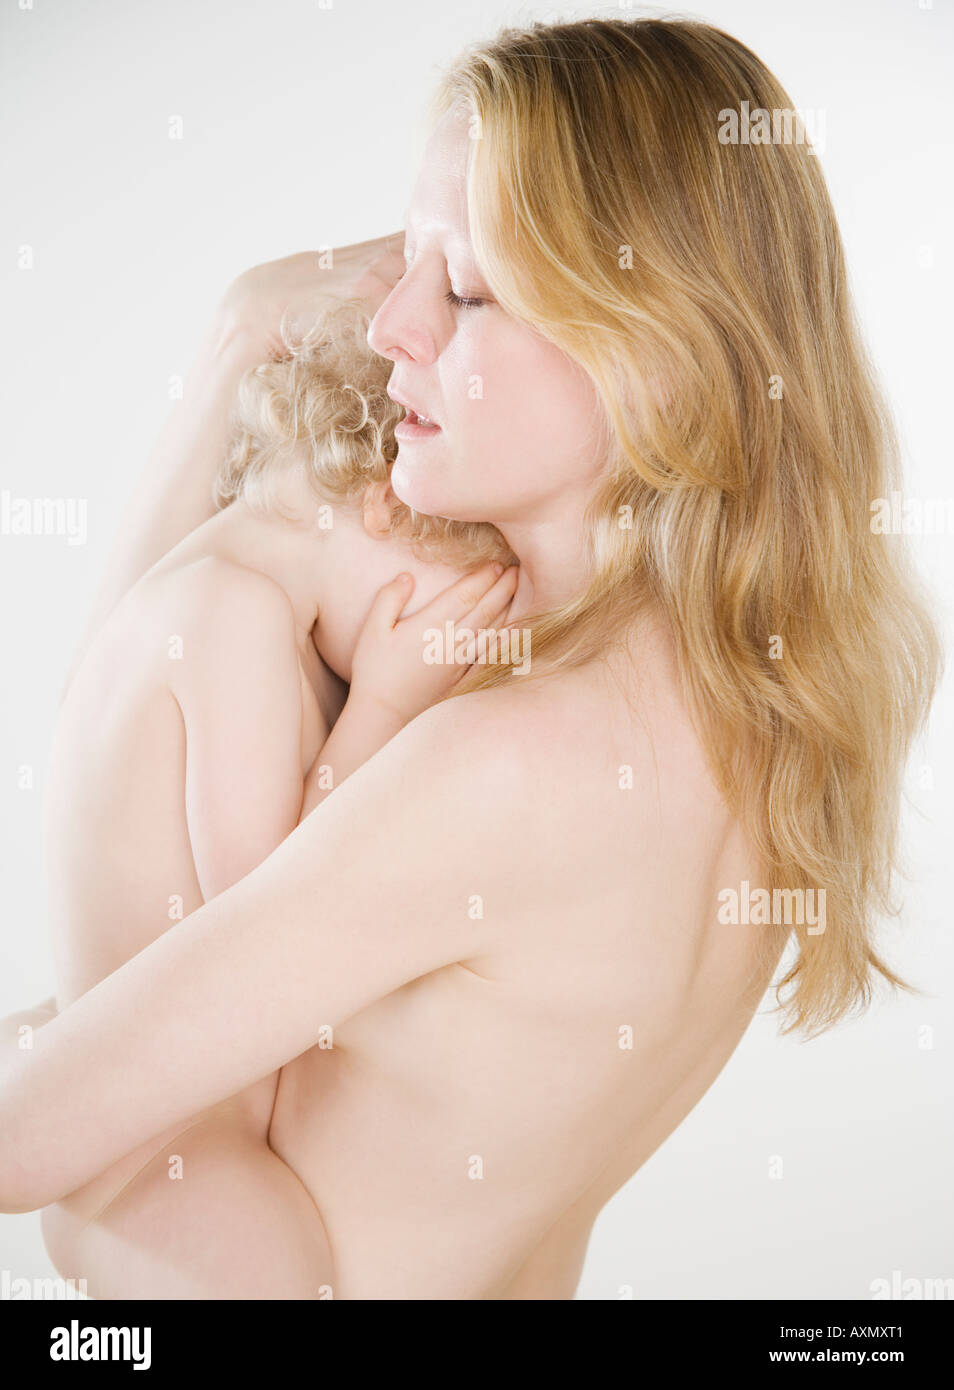 Nude portrait of mother and child Stock Photo - Alamy